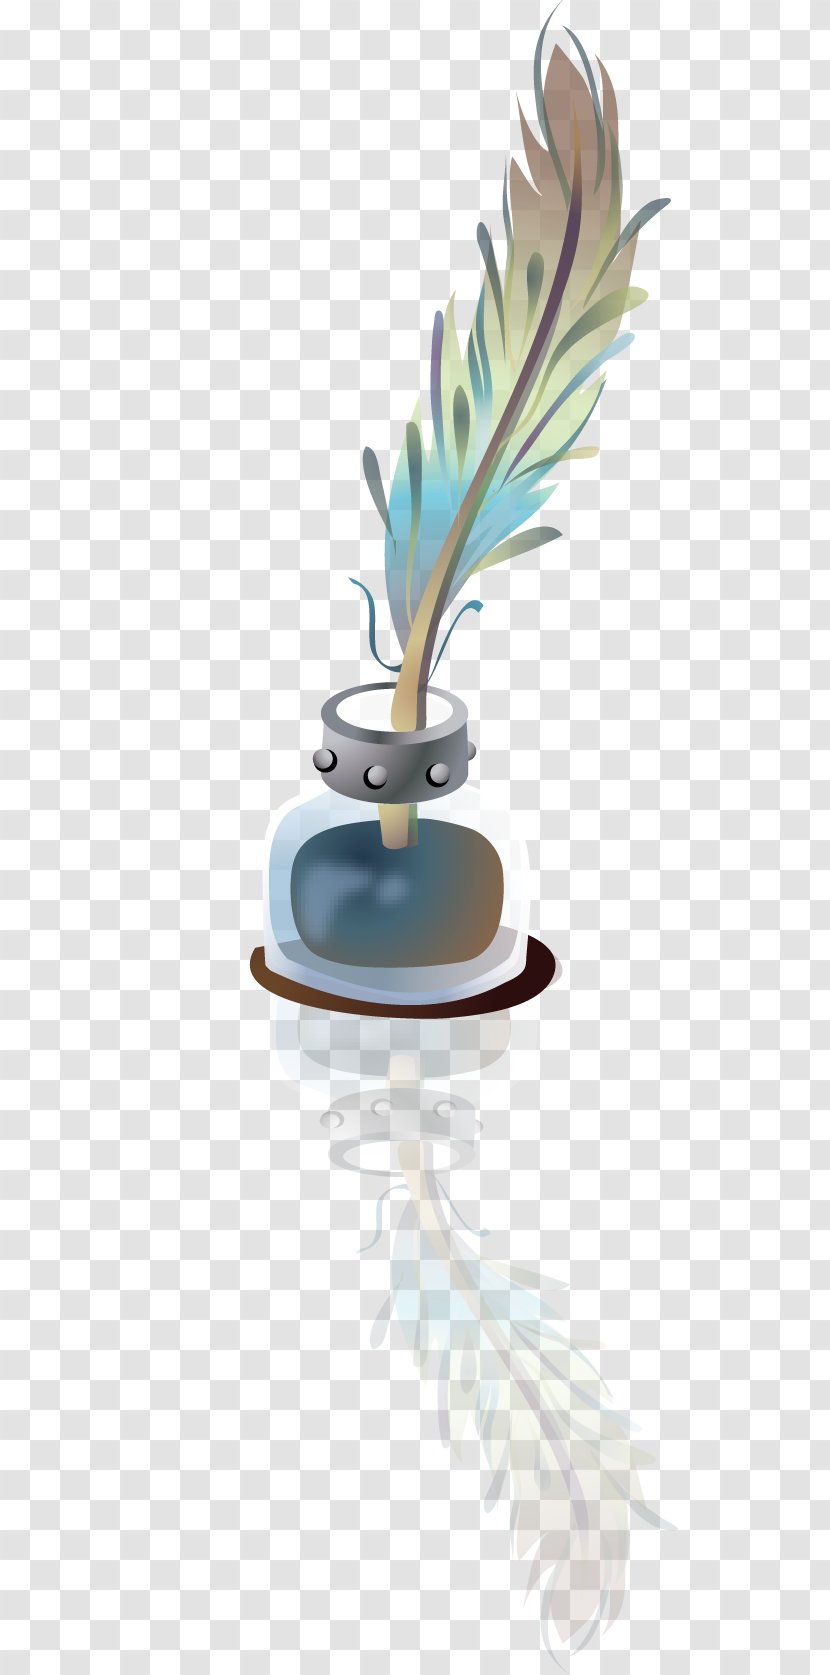 Feather Quill Fountain Pen - Cartoon Transparent PNG